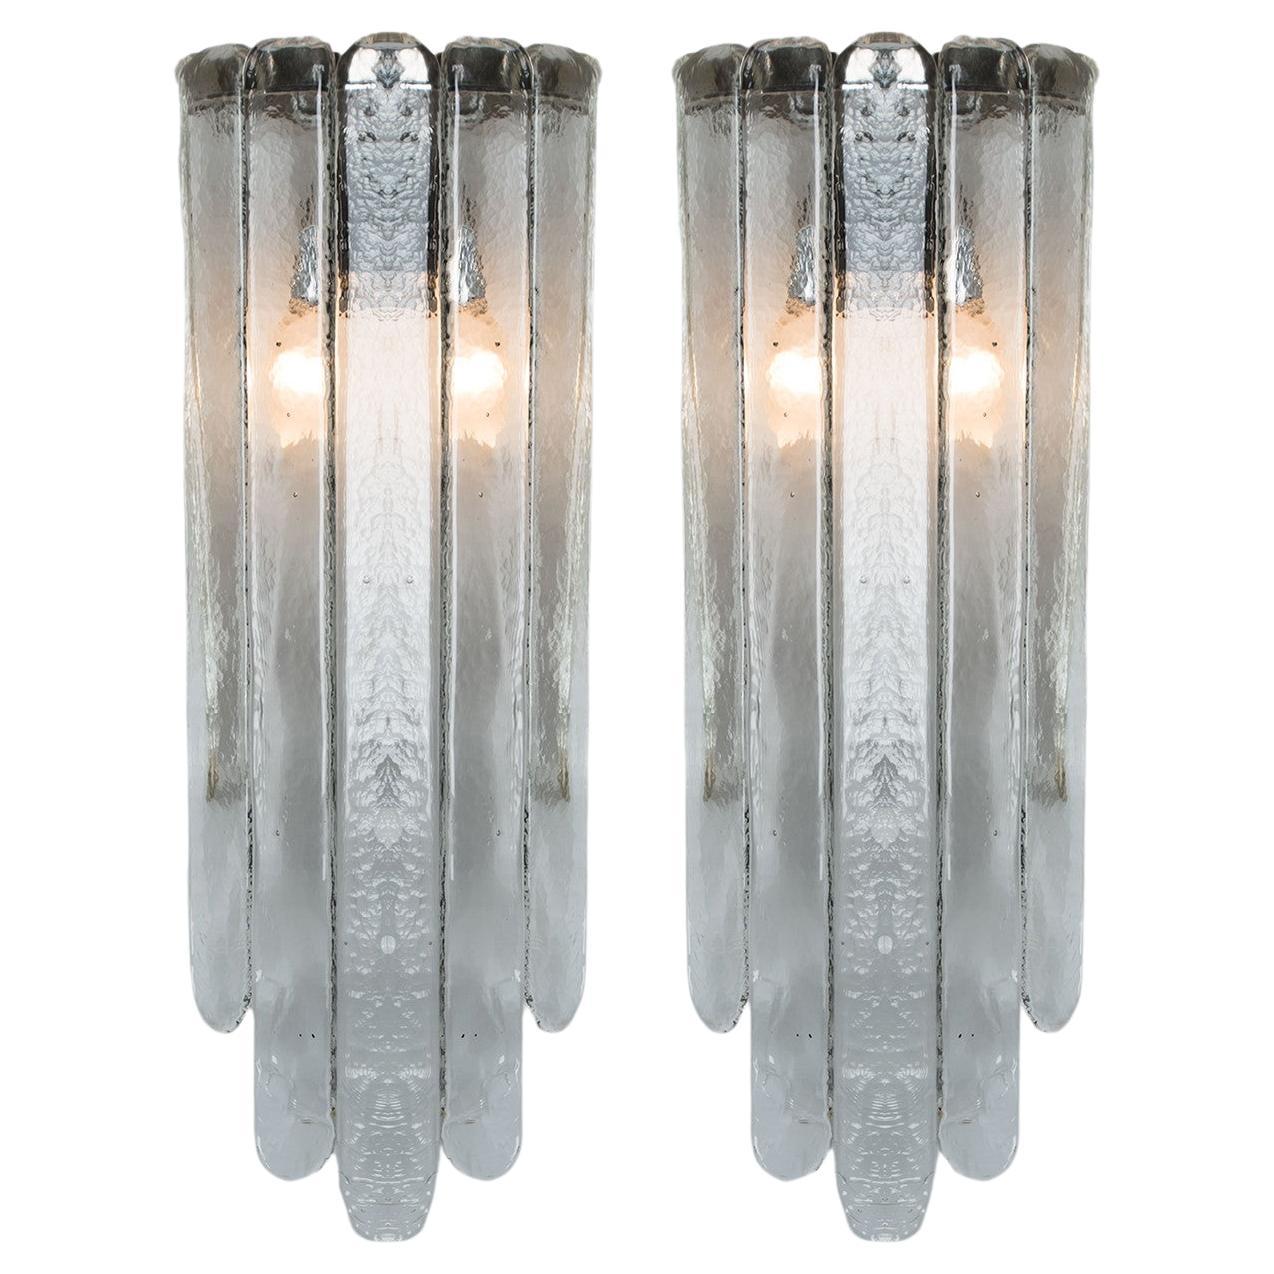 Pair of Long Clear Wall Lights, Mazzega, 1970s For Sale